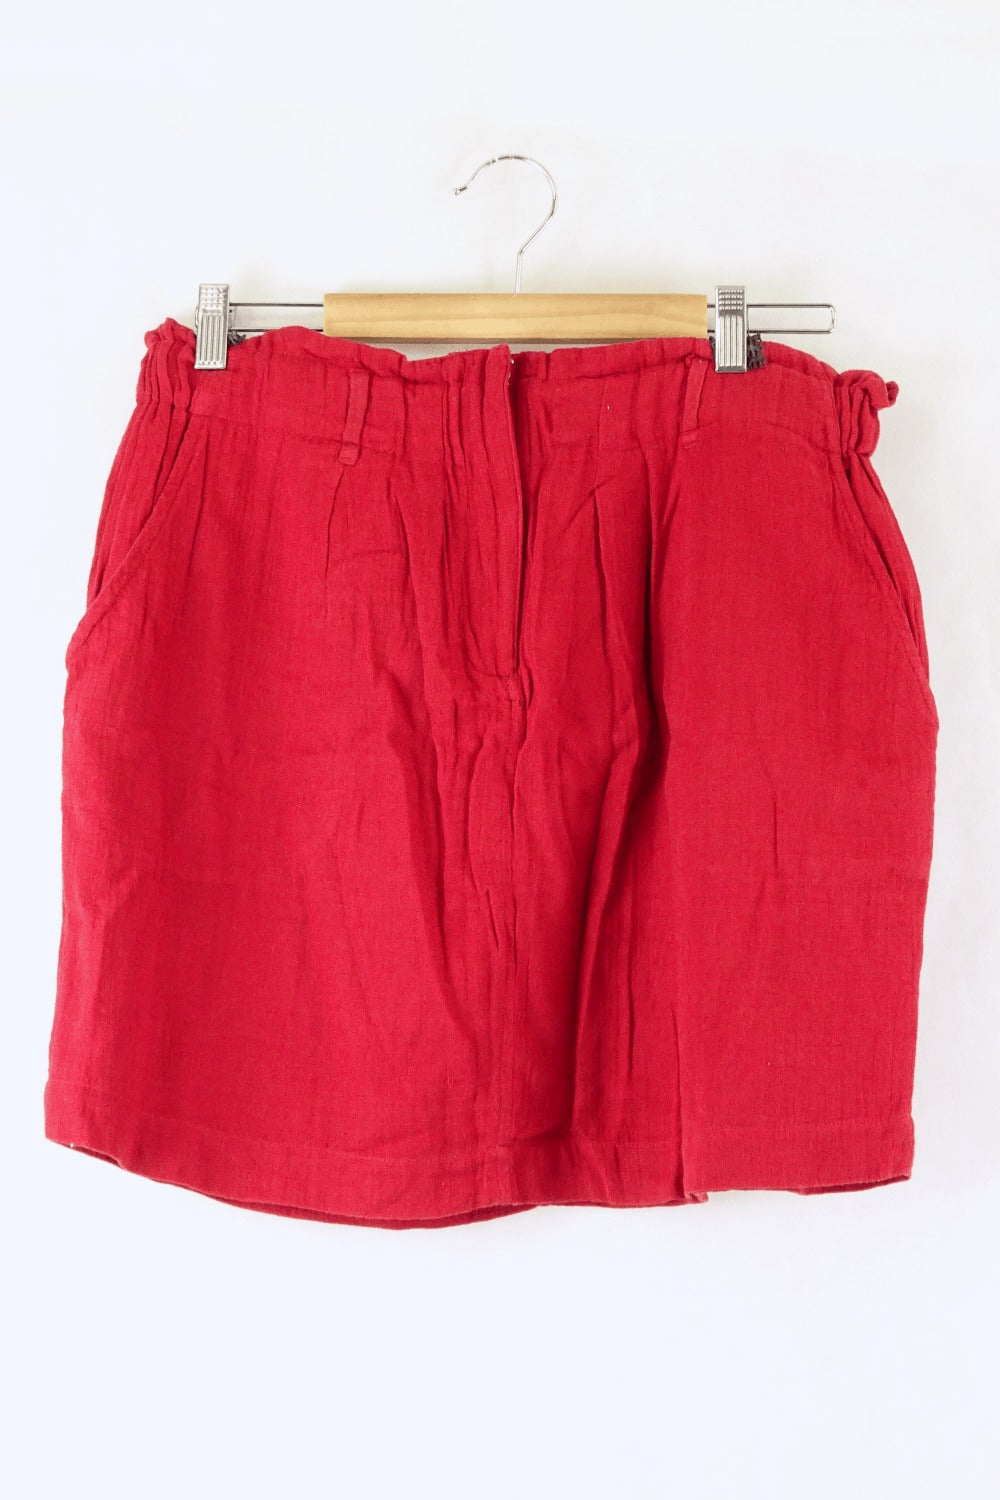 Country Road Red Skirt 12